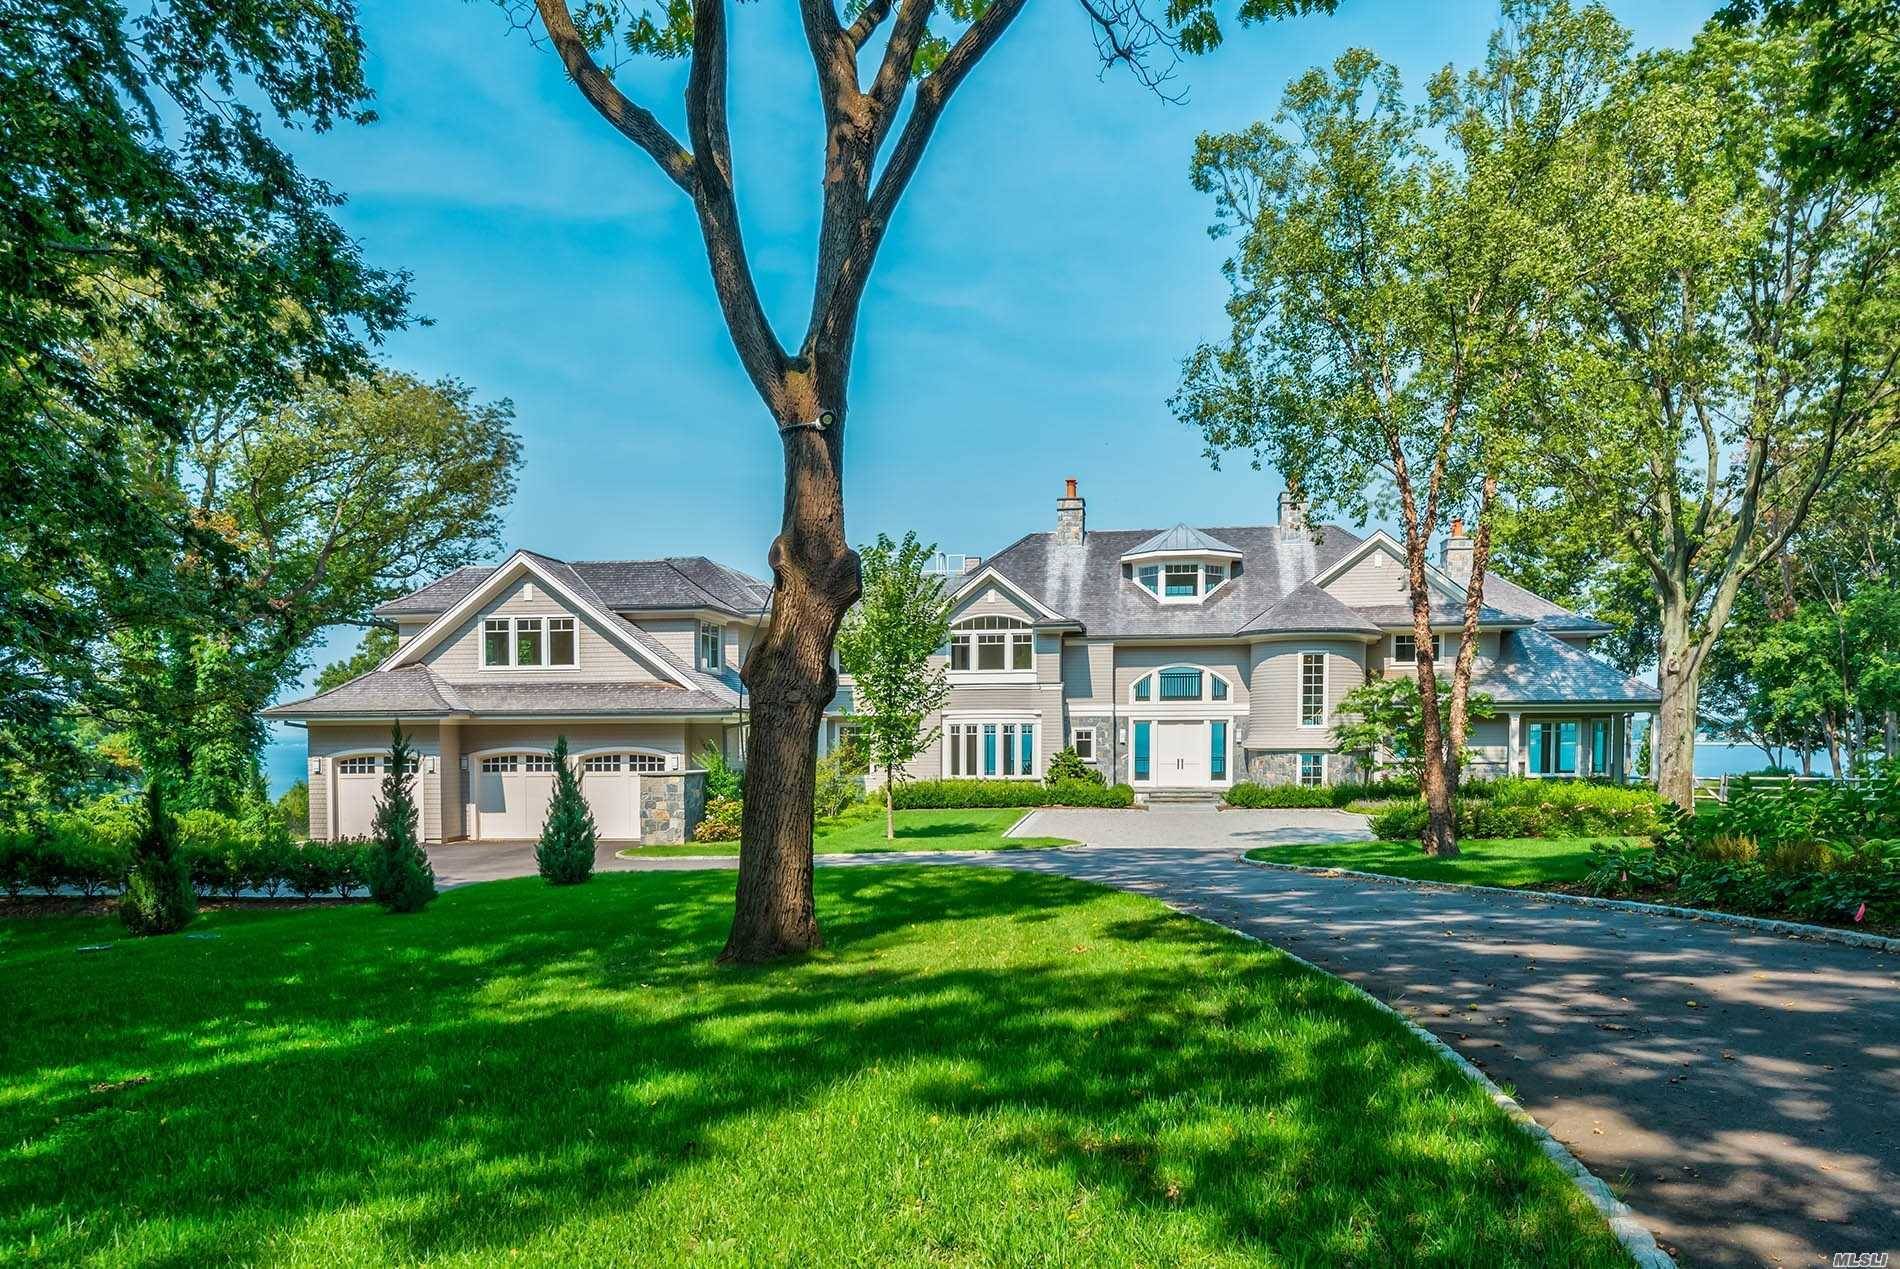 Set privately on 3. 38 acres high above sea level with 400' of sandy coastline, this 16, 000 sq ft new construction smart home sets the standard for luxury.